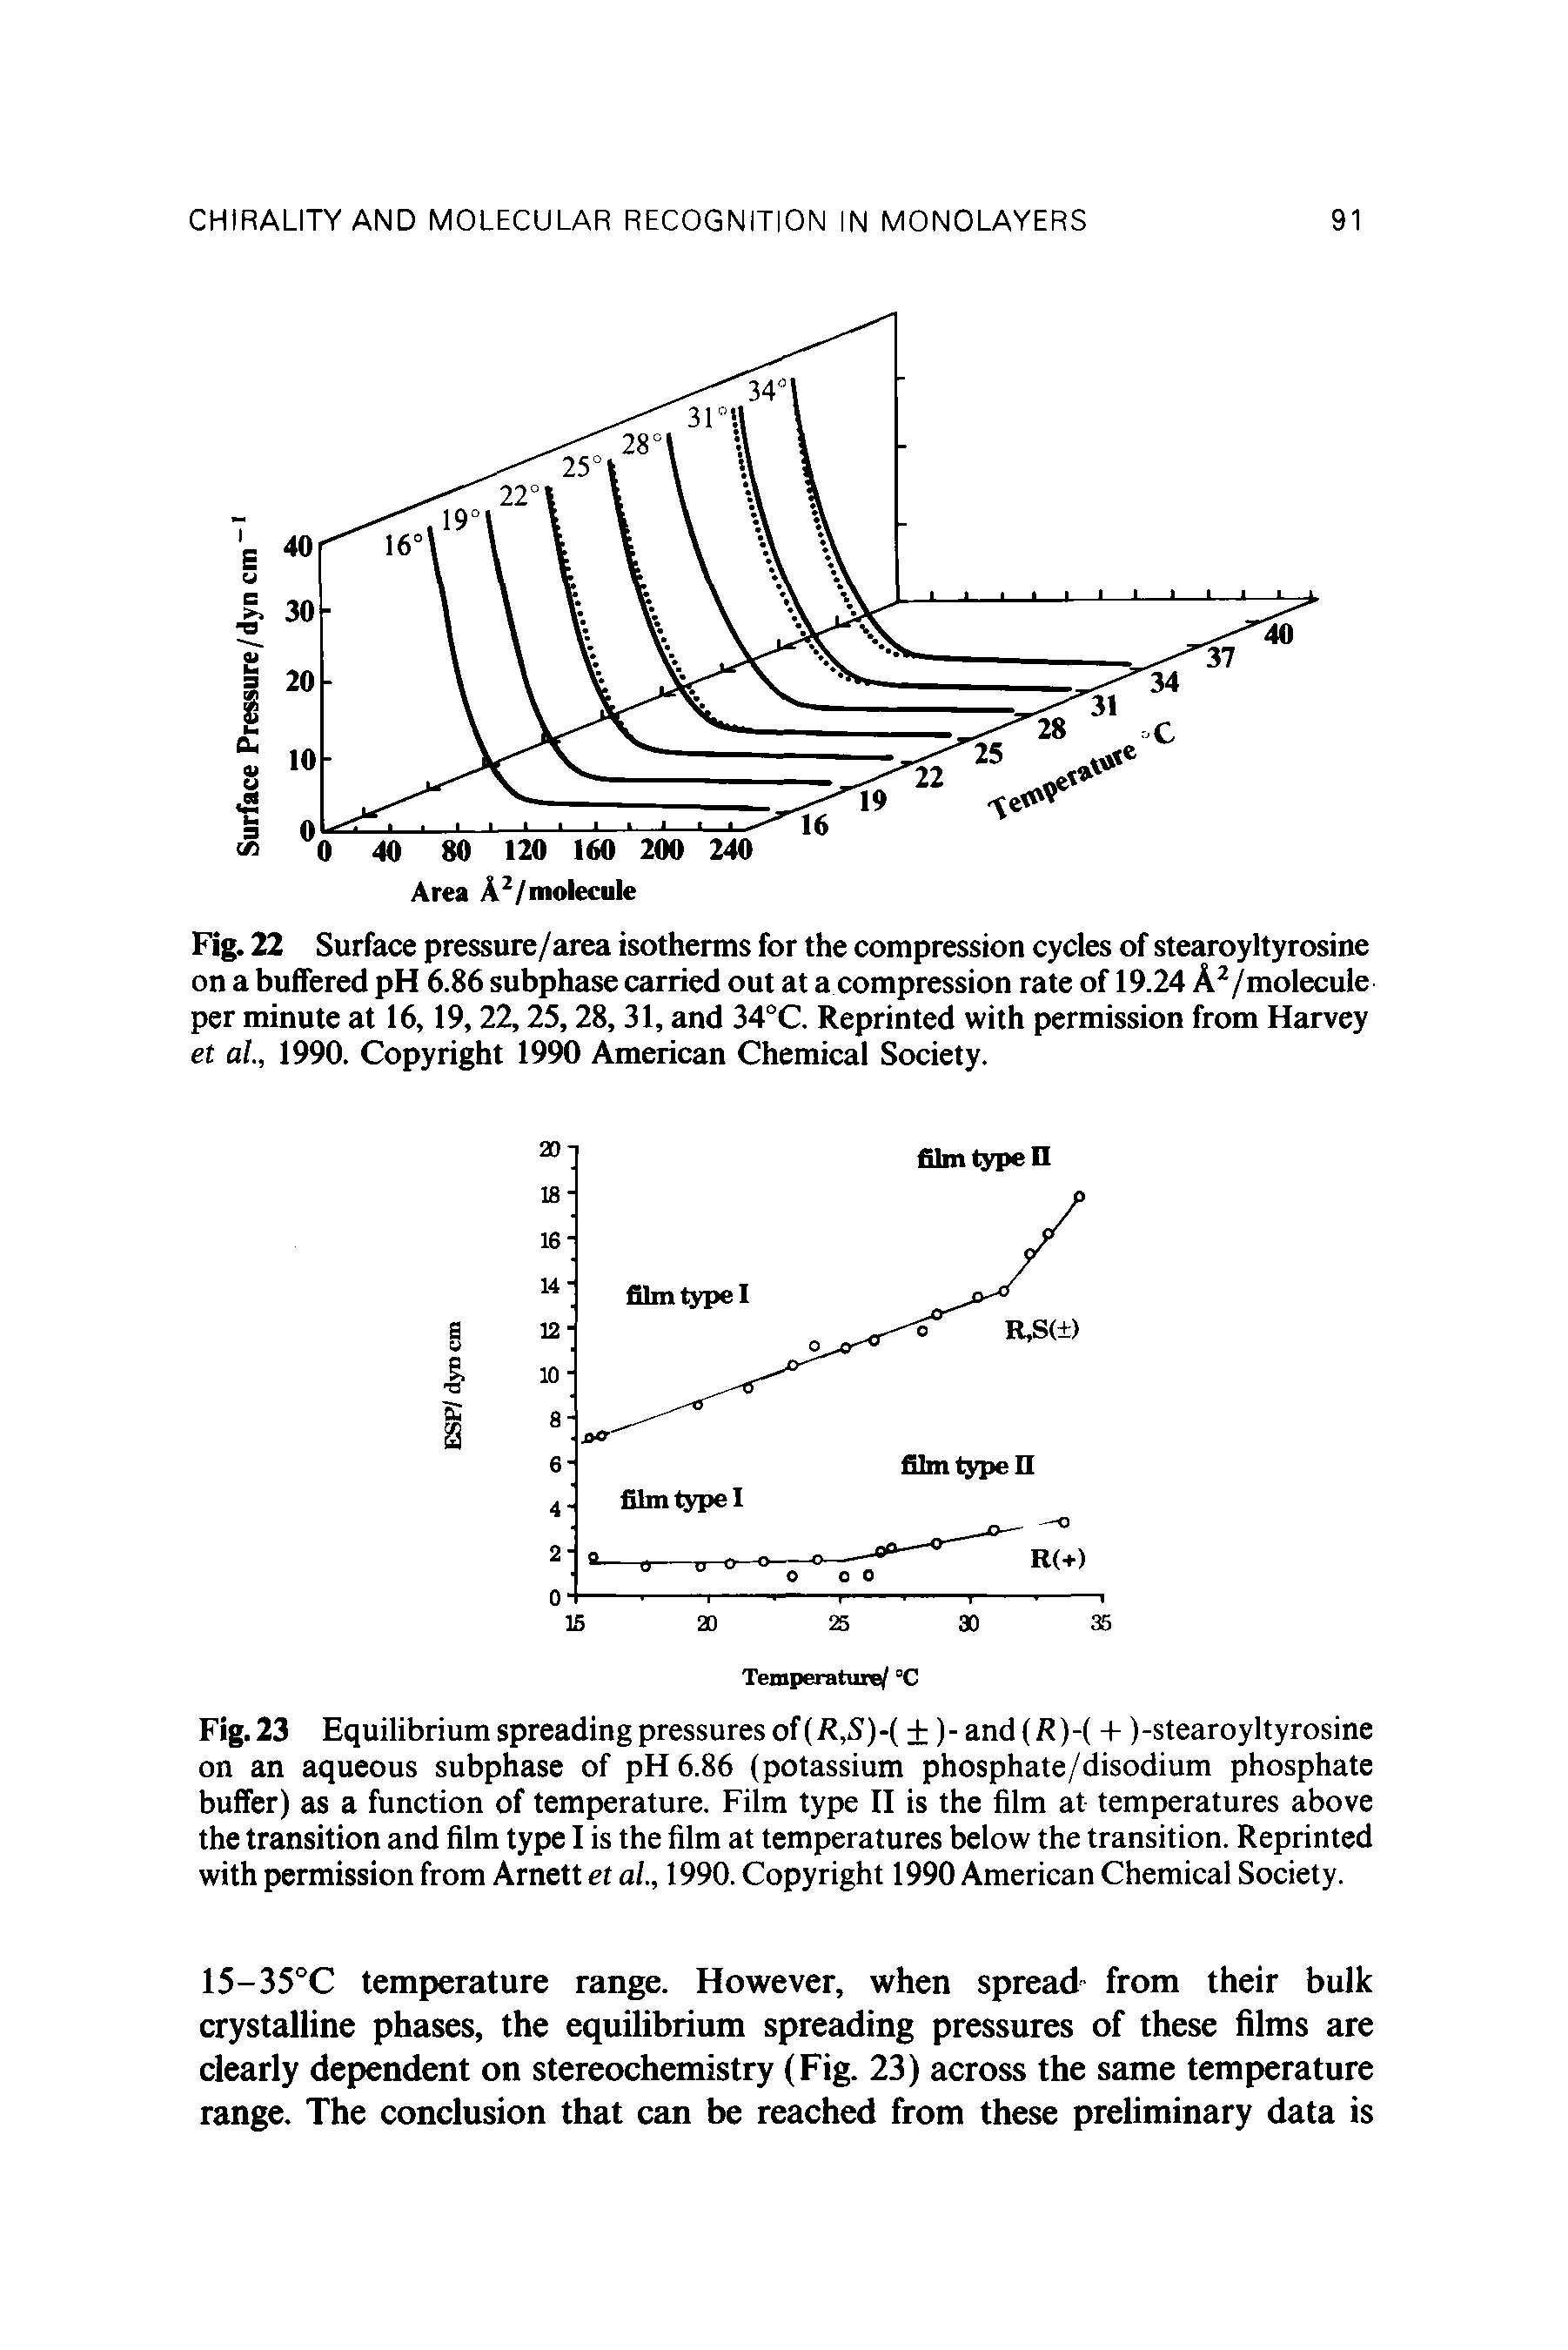 Fig. 22 Surface pressure/area isotherms for the compression cycles of stearoyltyrosine on a buffered pH 6.86 subphase carried out at a compression rate of 19.24 A2/molecule per minute at 16,19,22,25,28, 31, and 34°C. Reprinted with permission from Harvey et ah, 1990. Copyright 1990 American Chemical Society.